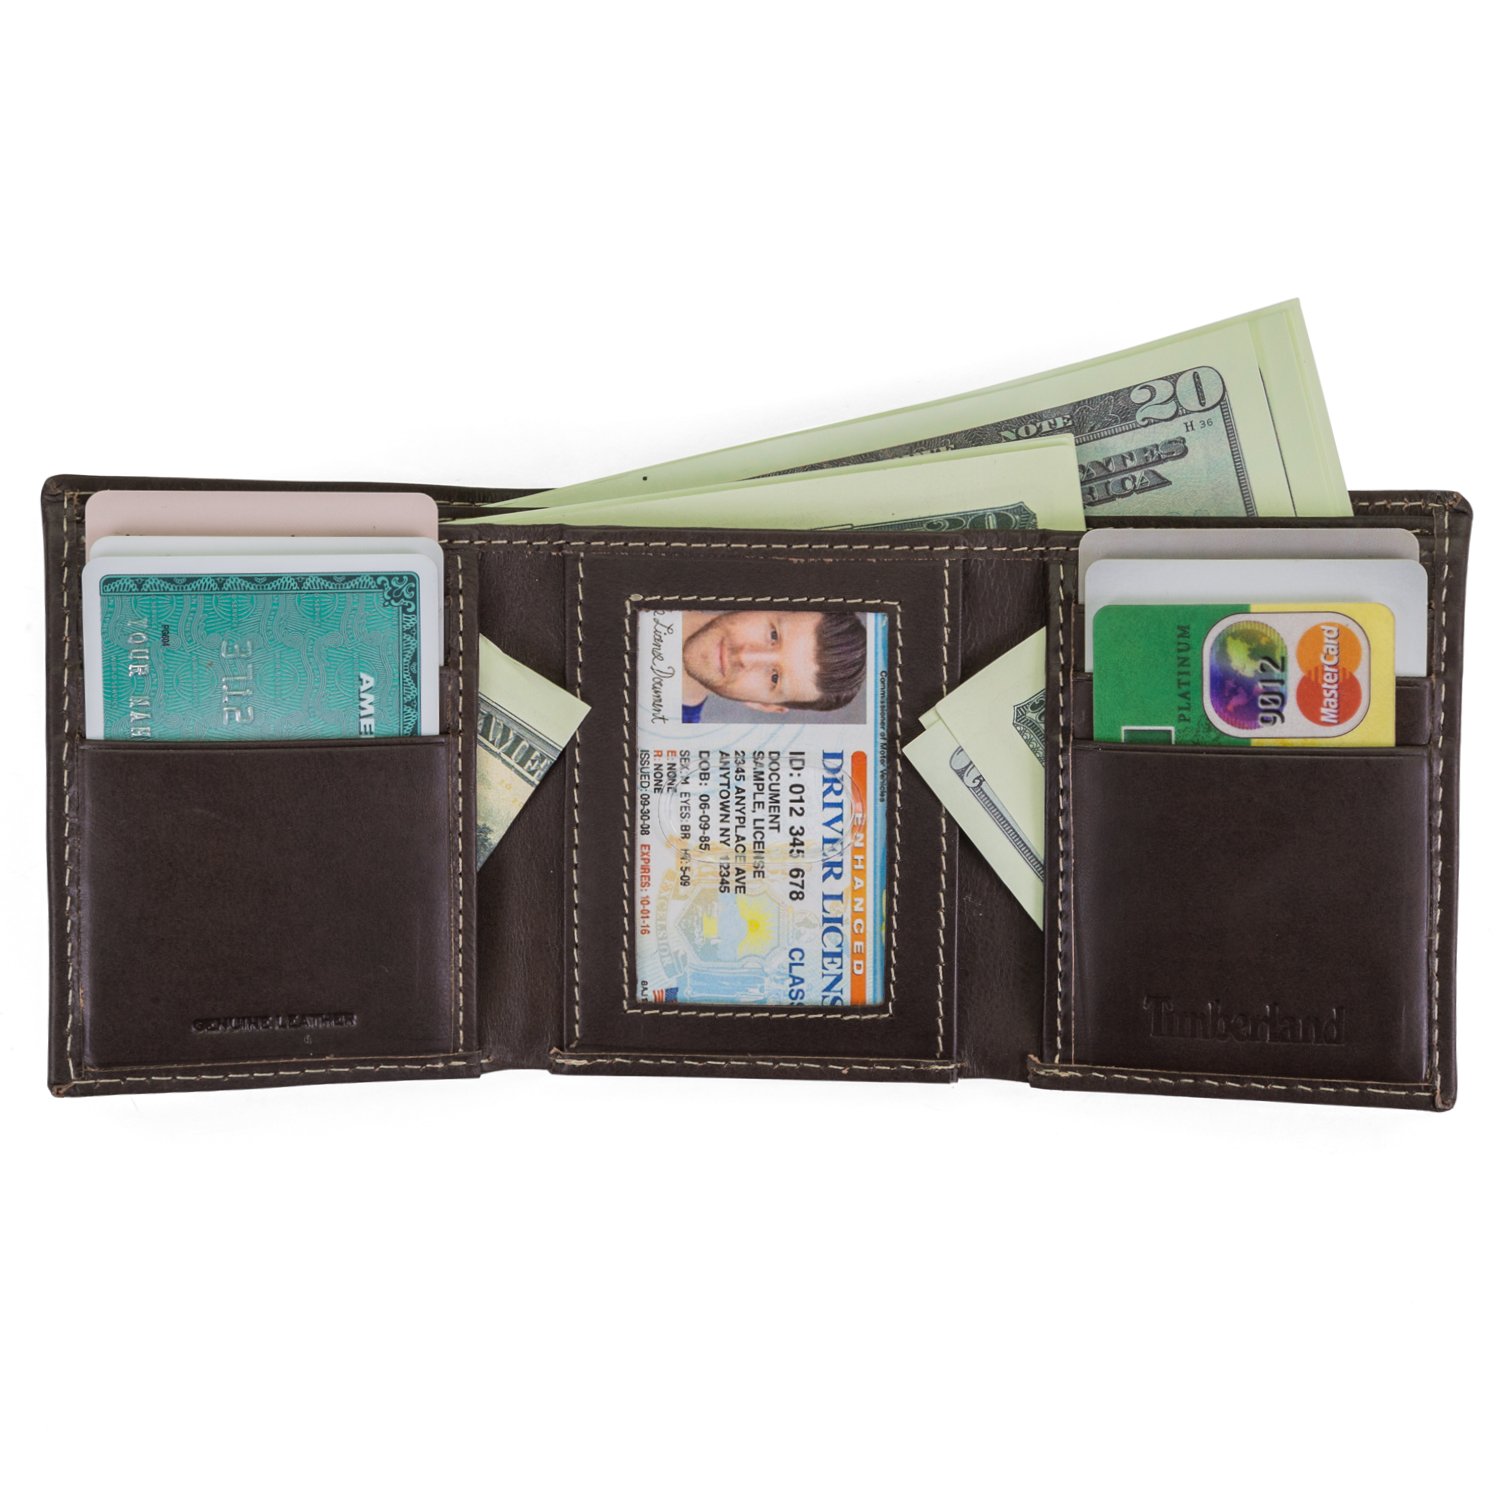 Timberland Men's Leather Trifold Wallet with Id Window